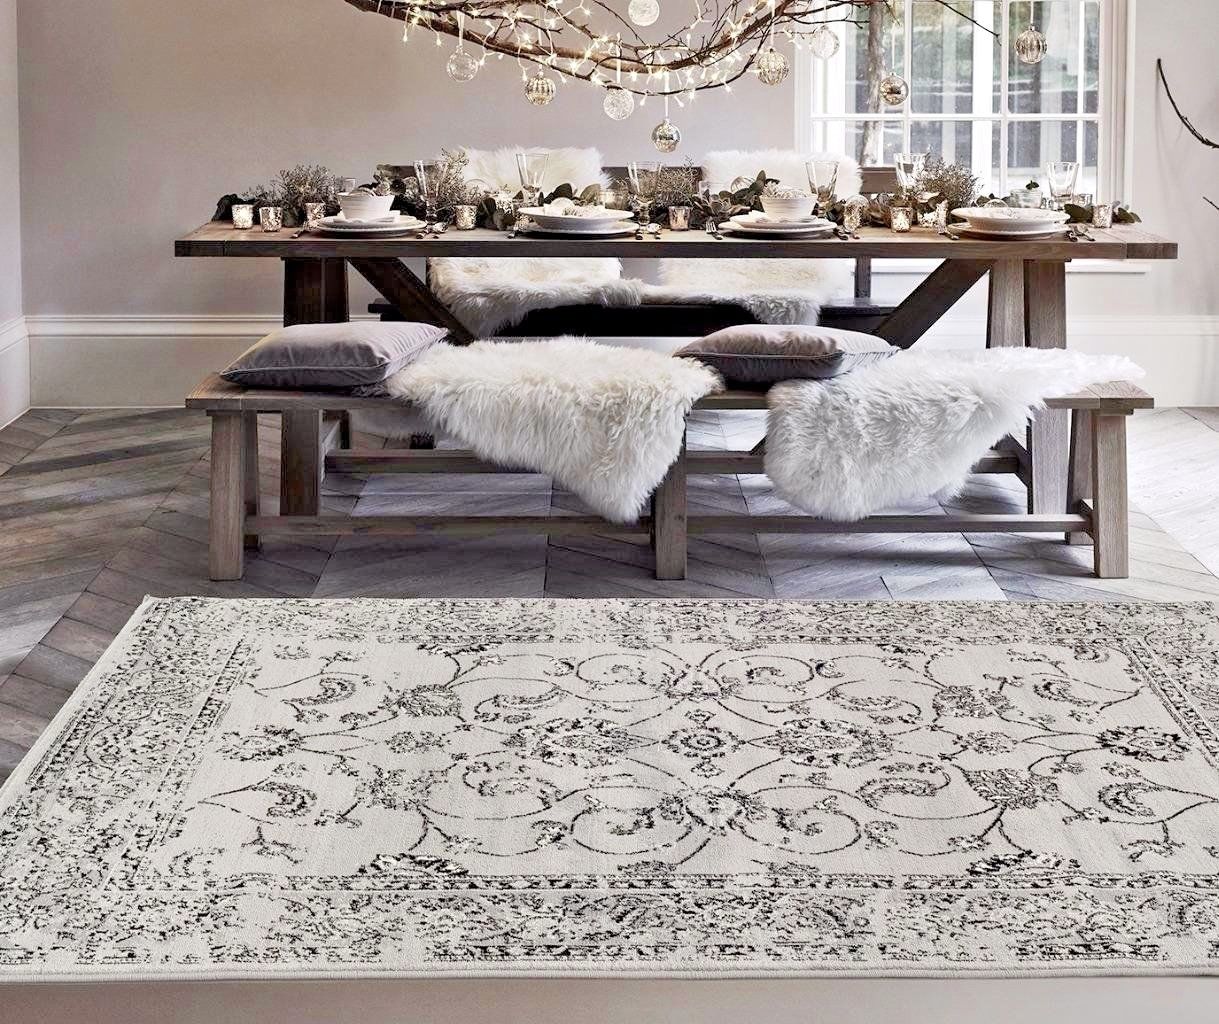 Large floor rugs – benefits and placing tips